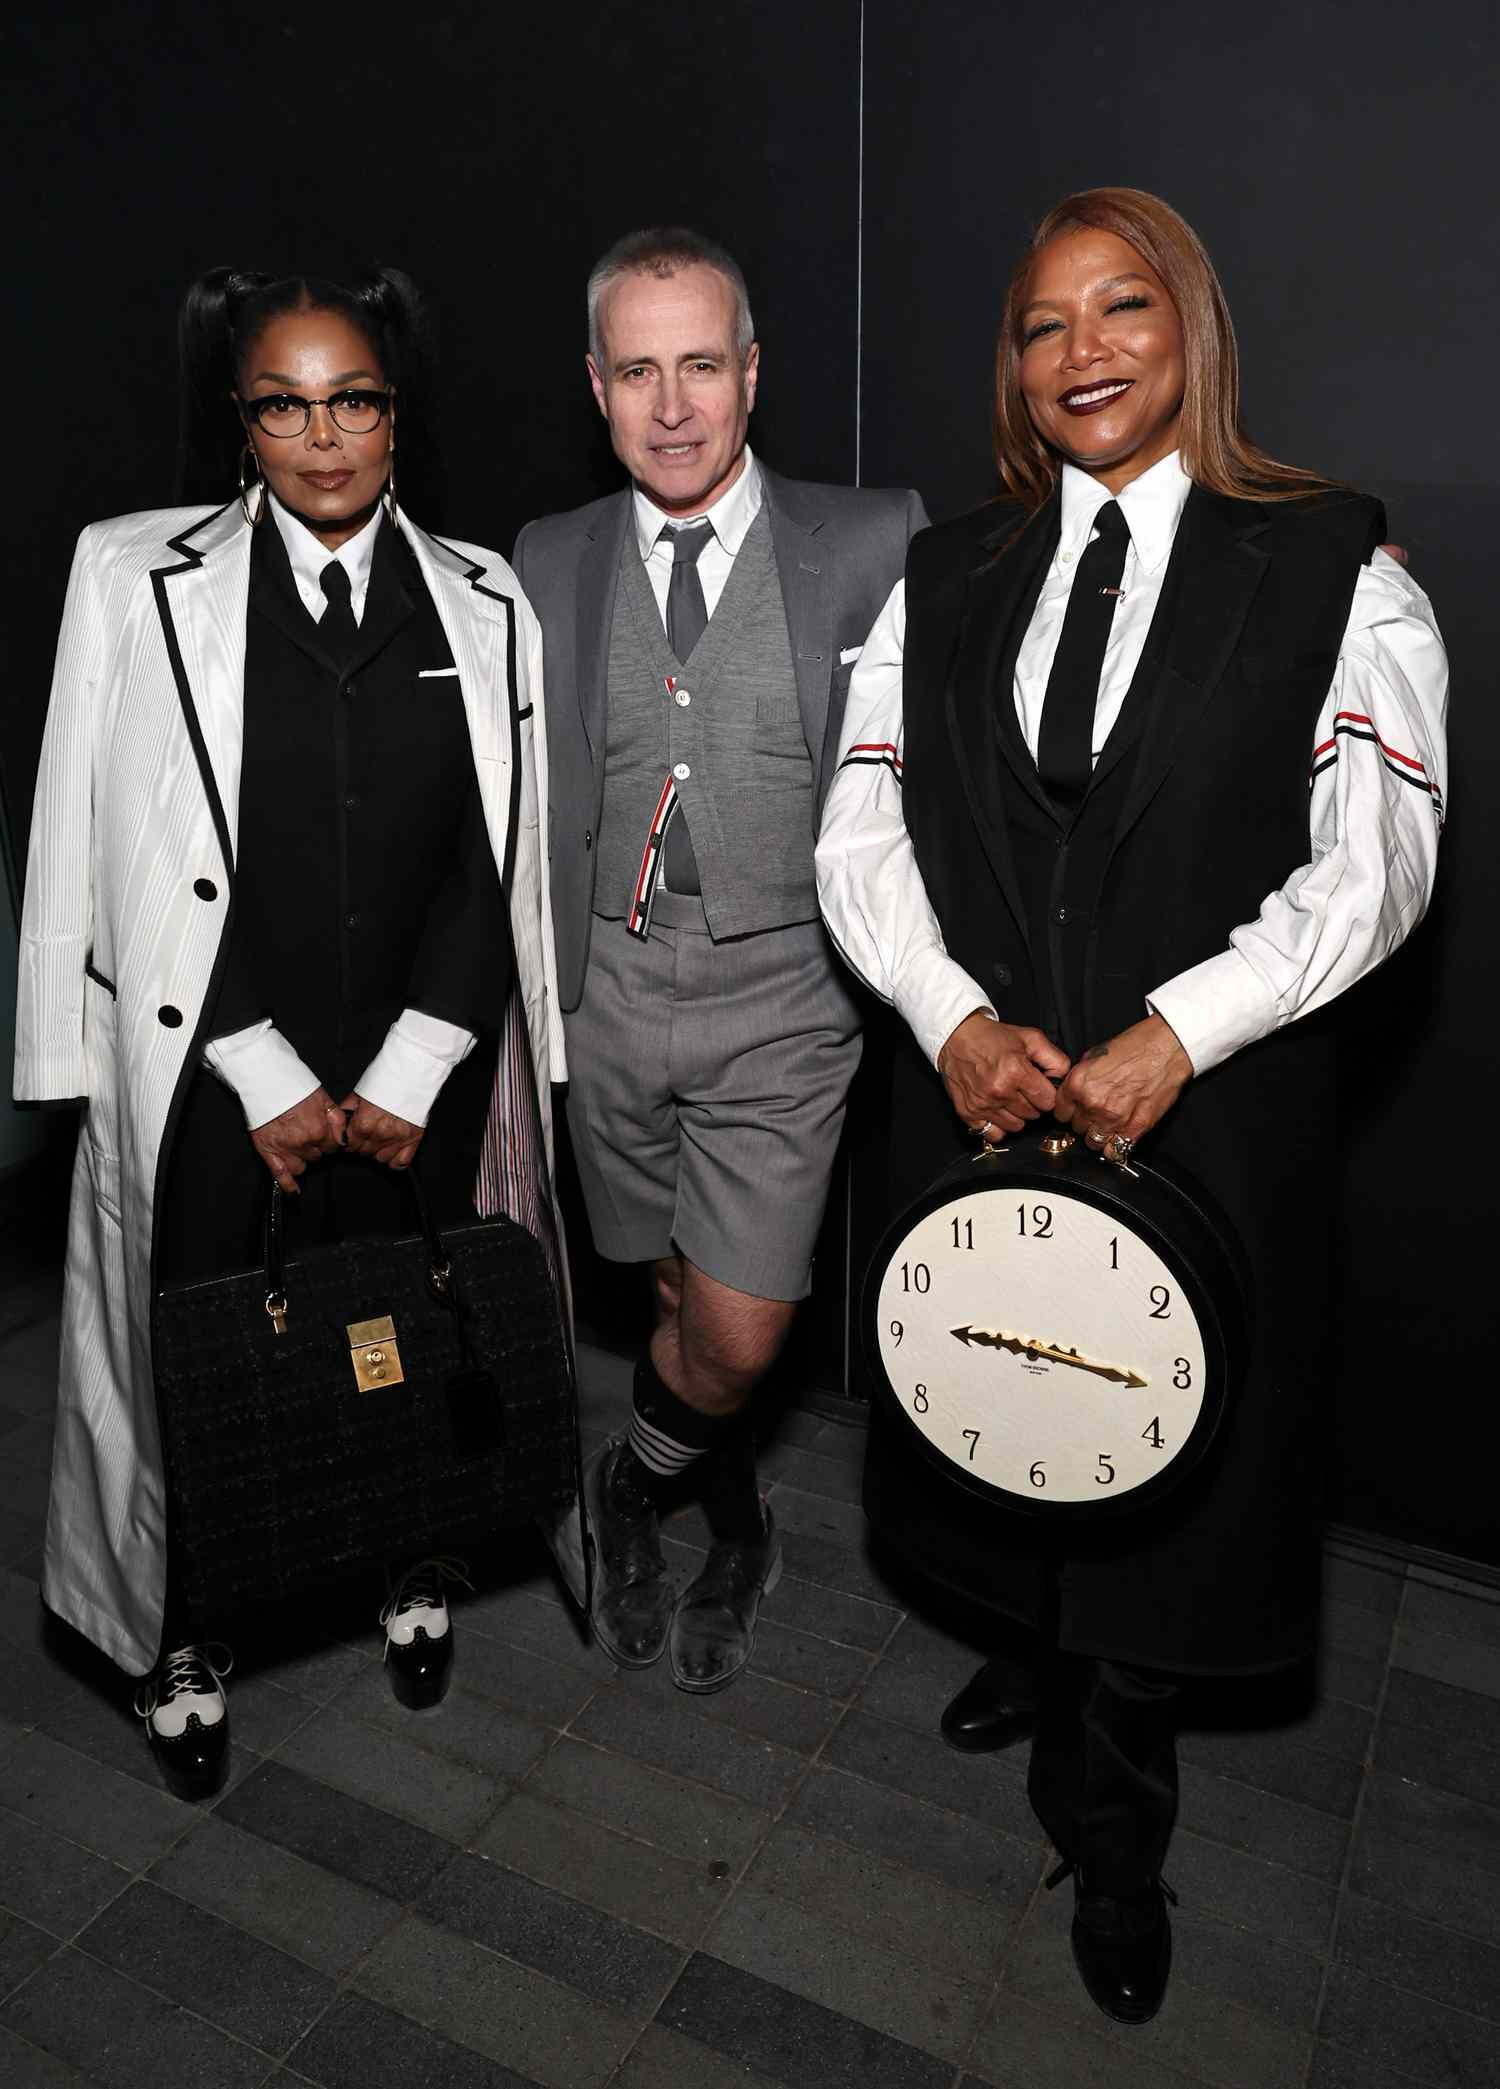 Janet Jackson, Thom Browne and Queen Latifah attend the Thom Browne fashion show